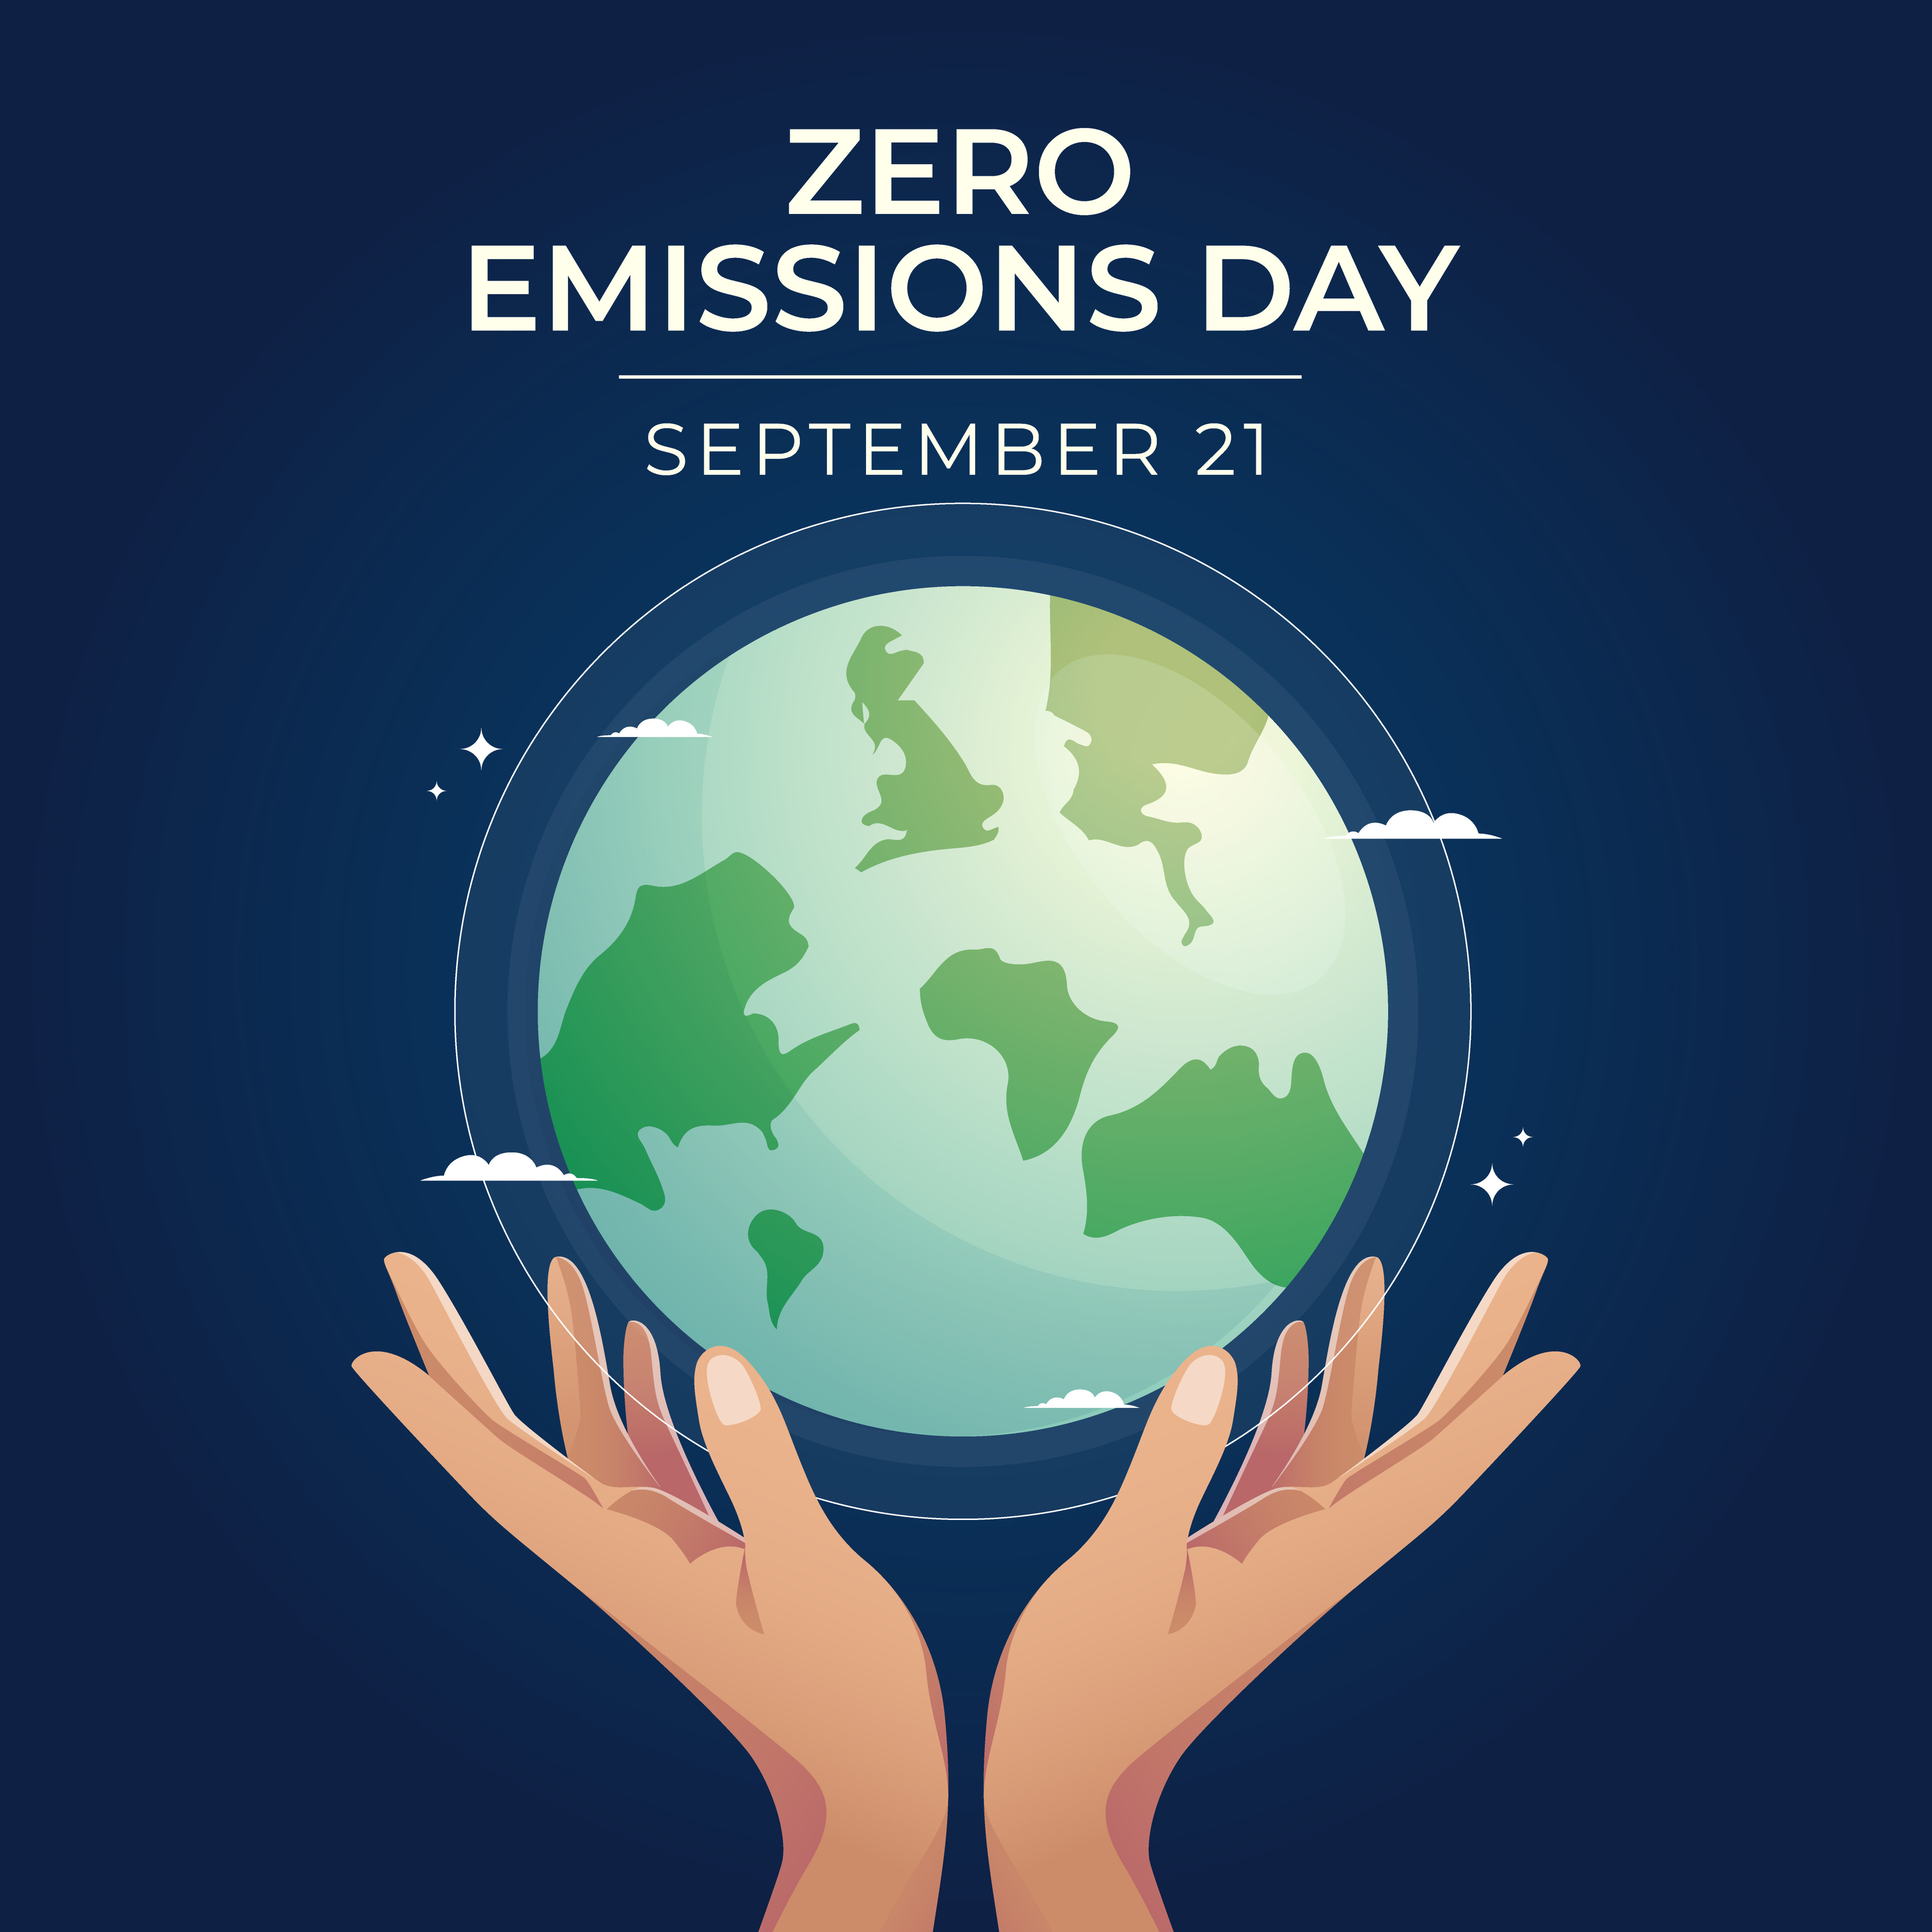 Actions to allow the planet to breathe – The Zero Emissions Day